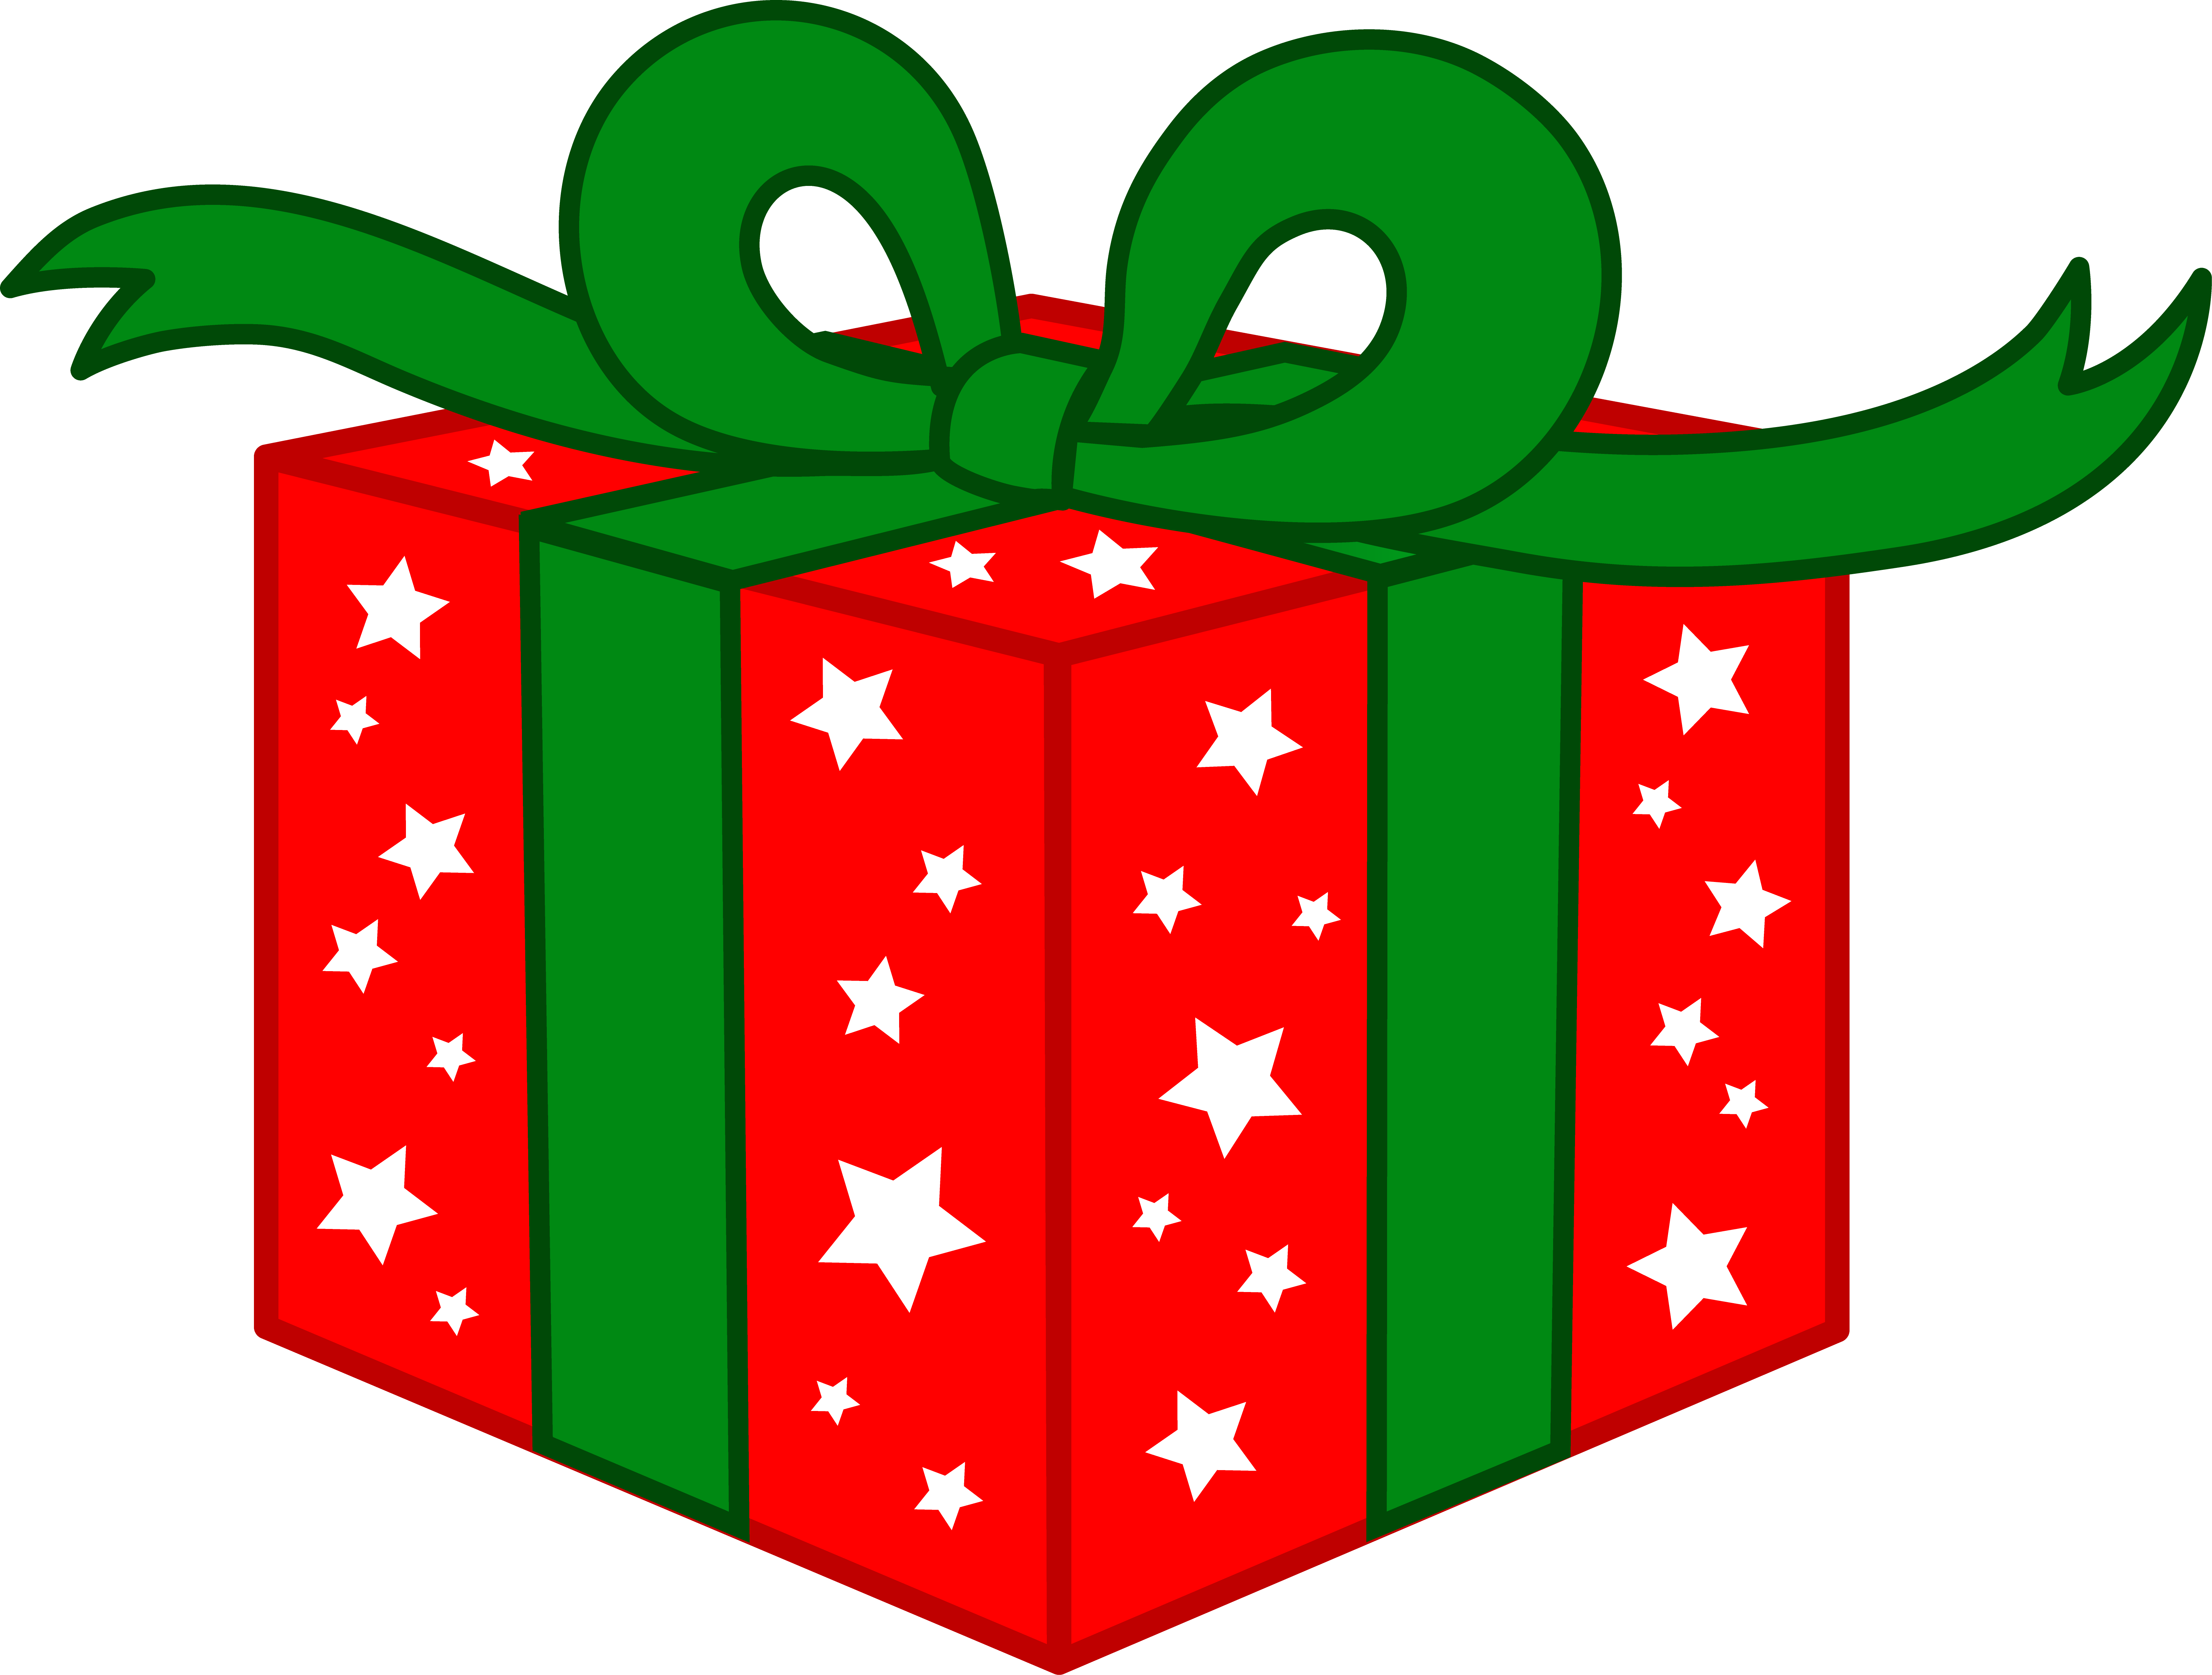 Christmas Gifts PNG Images, Download 47000+ Christmas Gifts PNG